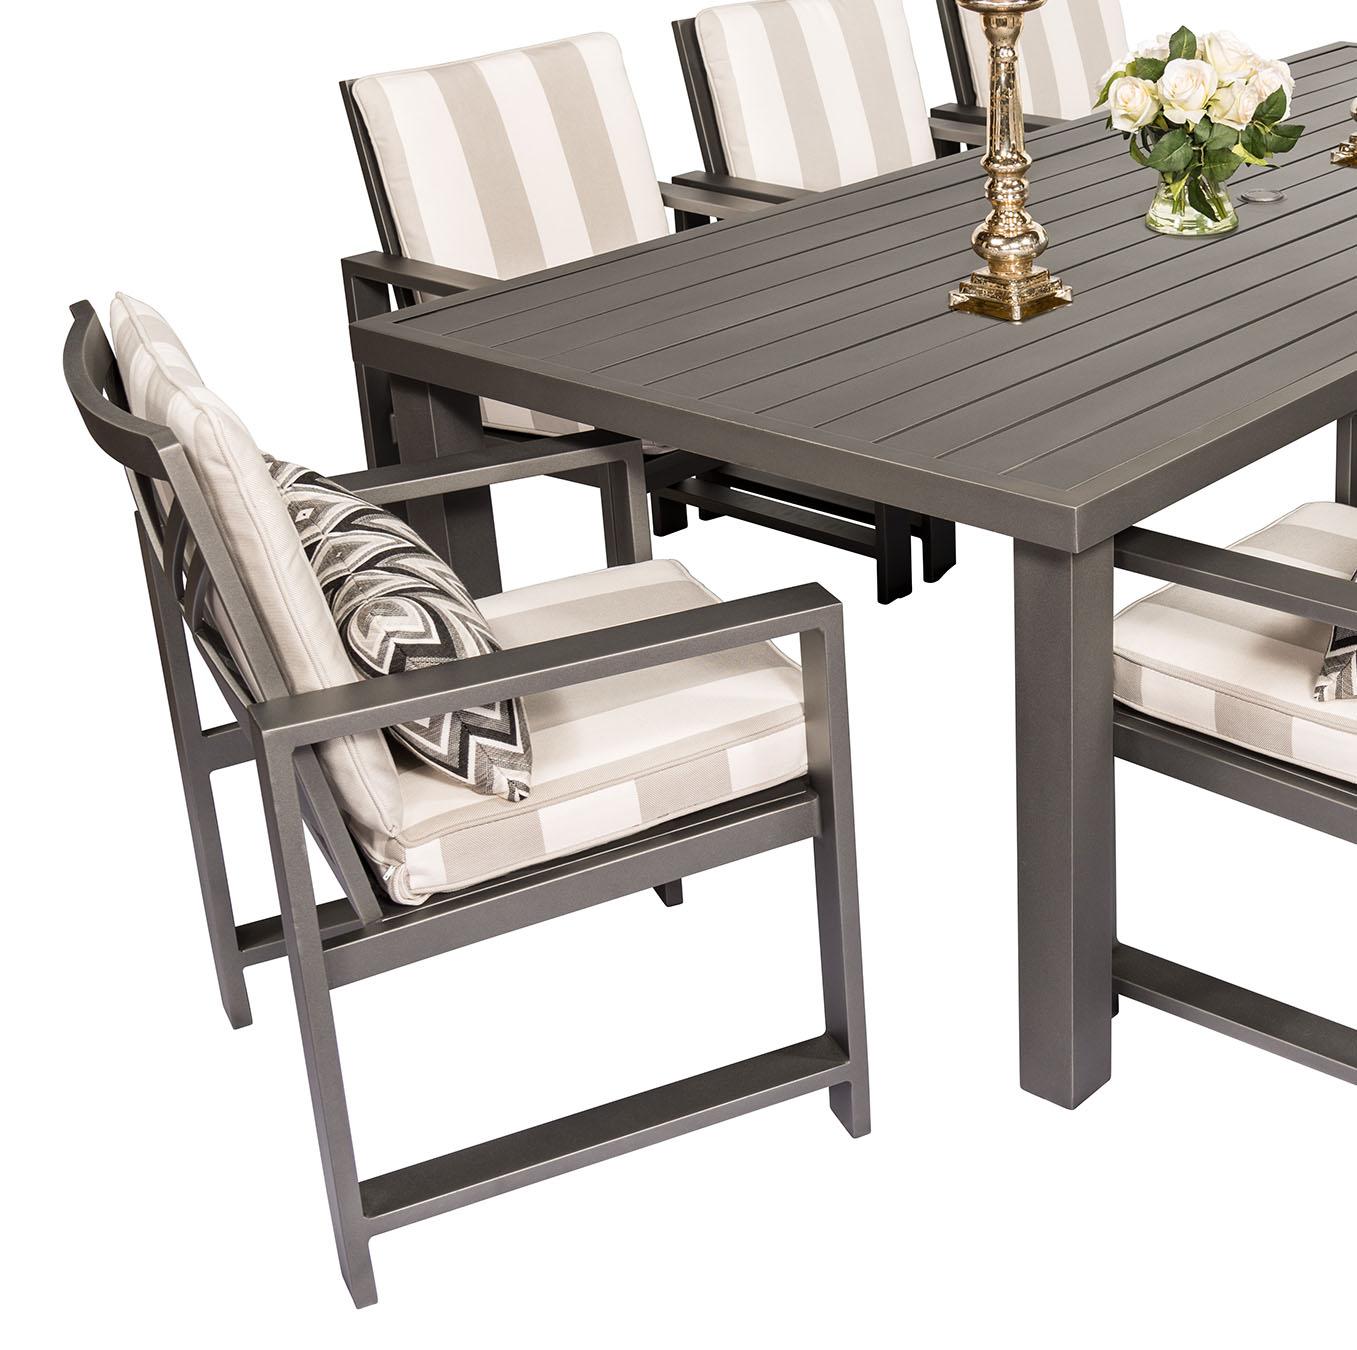 

    
CaliPatio Jolee Outdoor Dining Table Gray RCTDT7436JL
